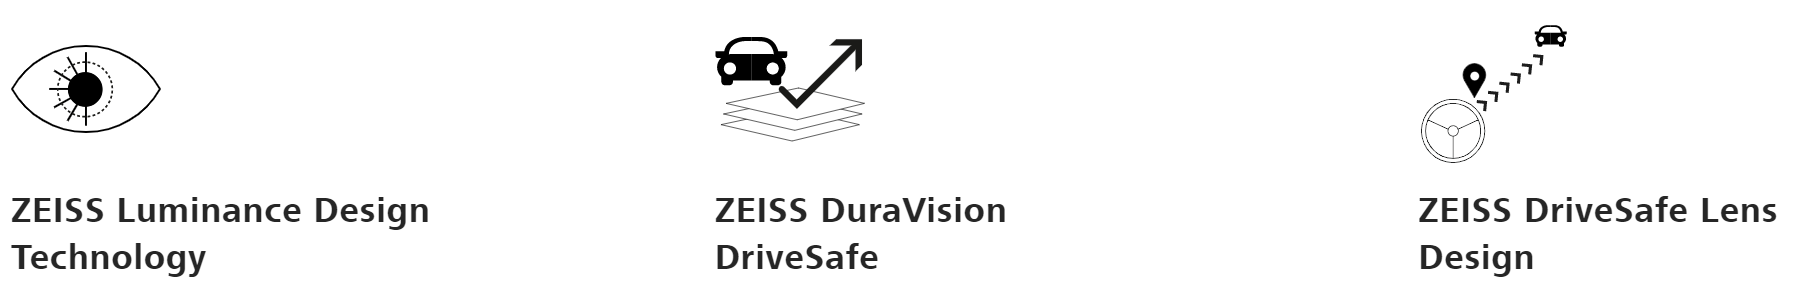 Features of DriveSafe